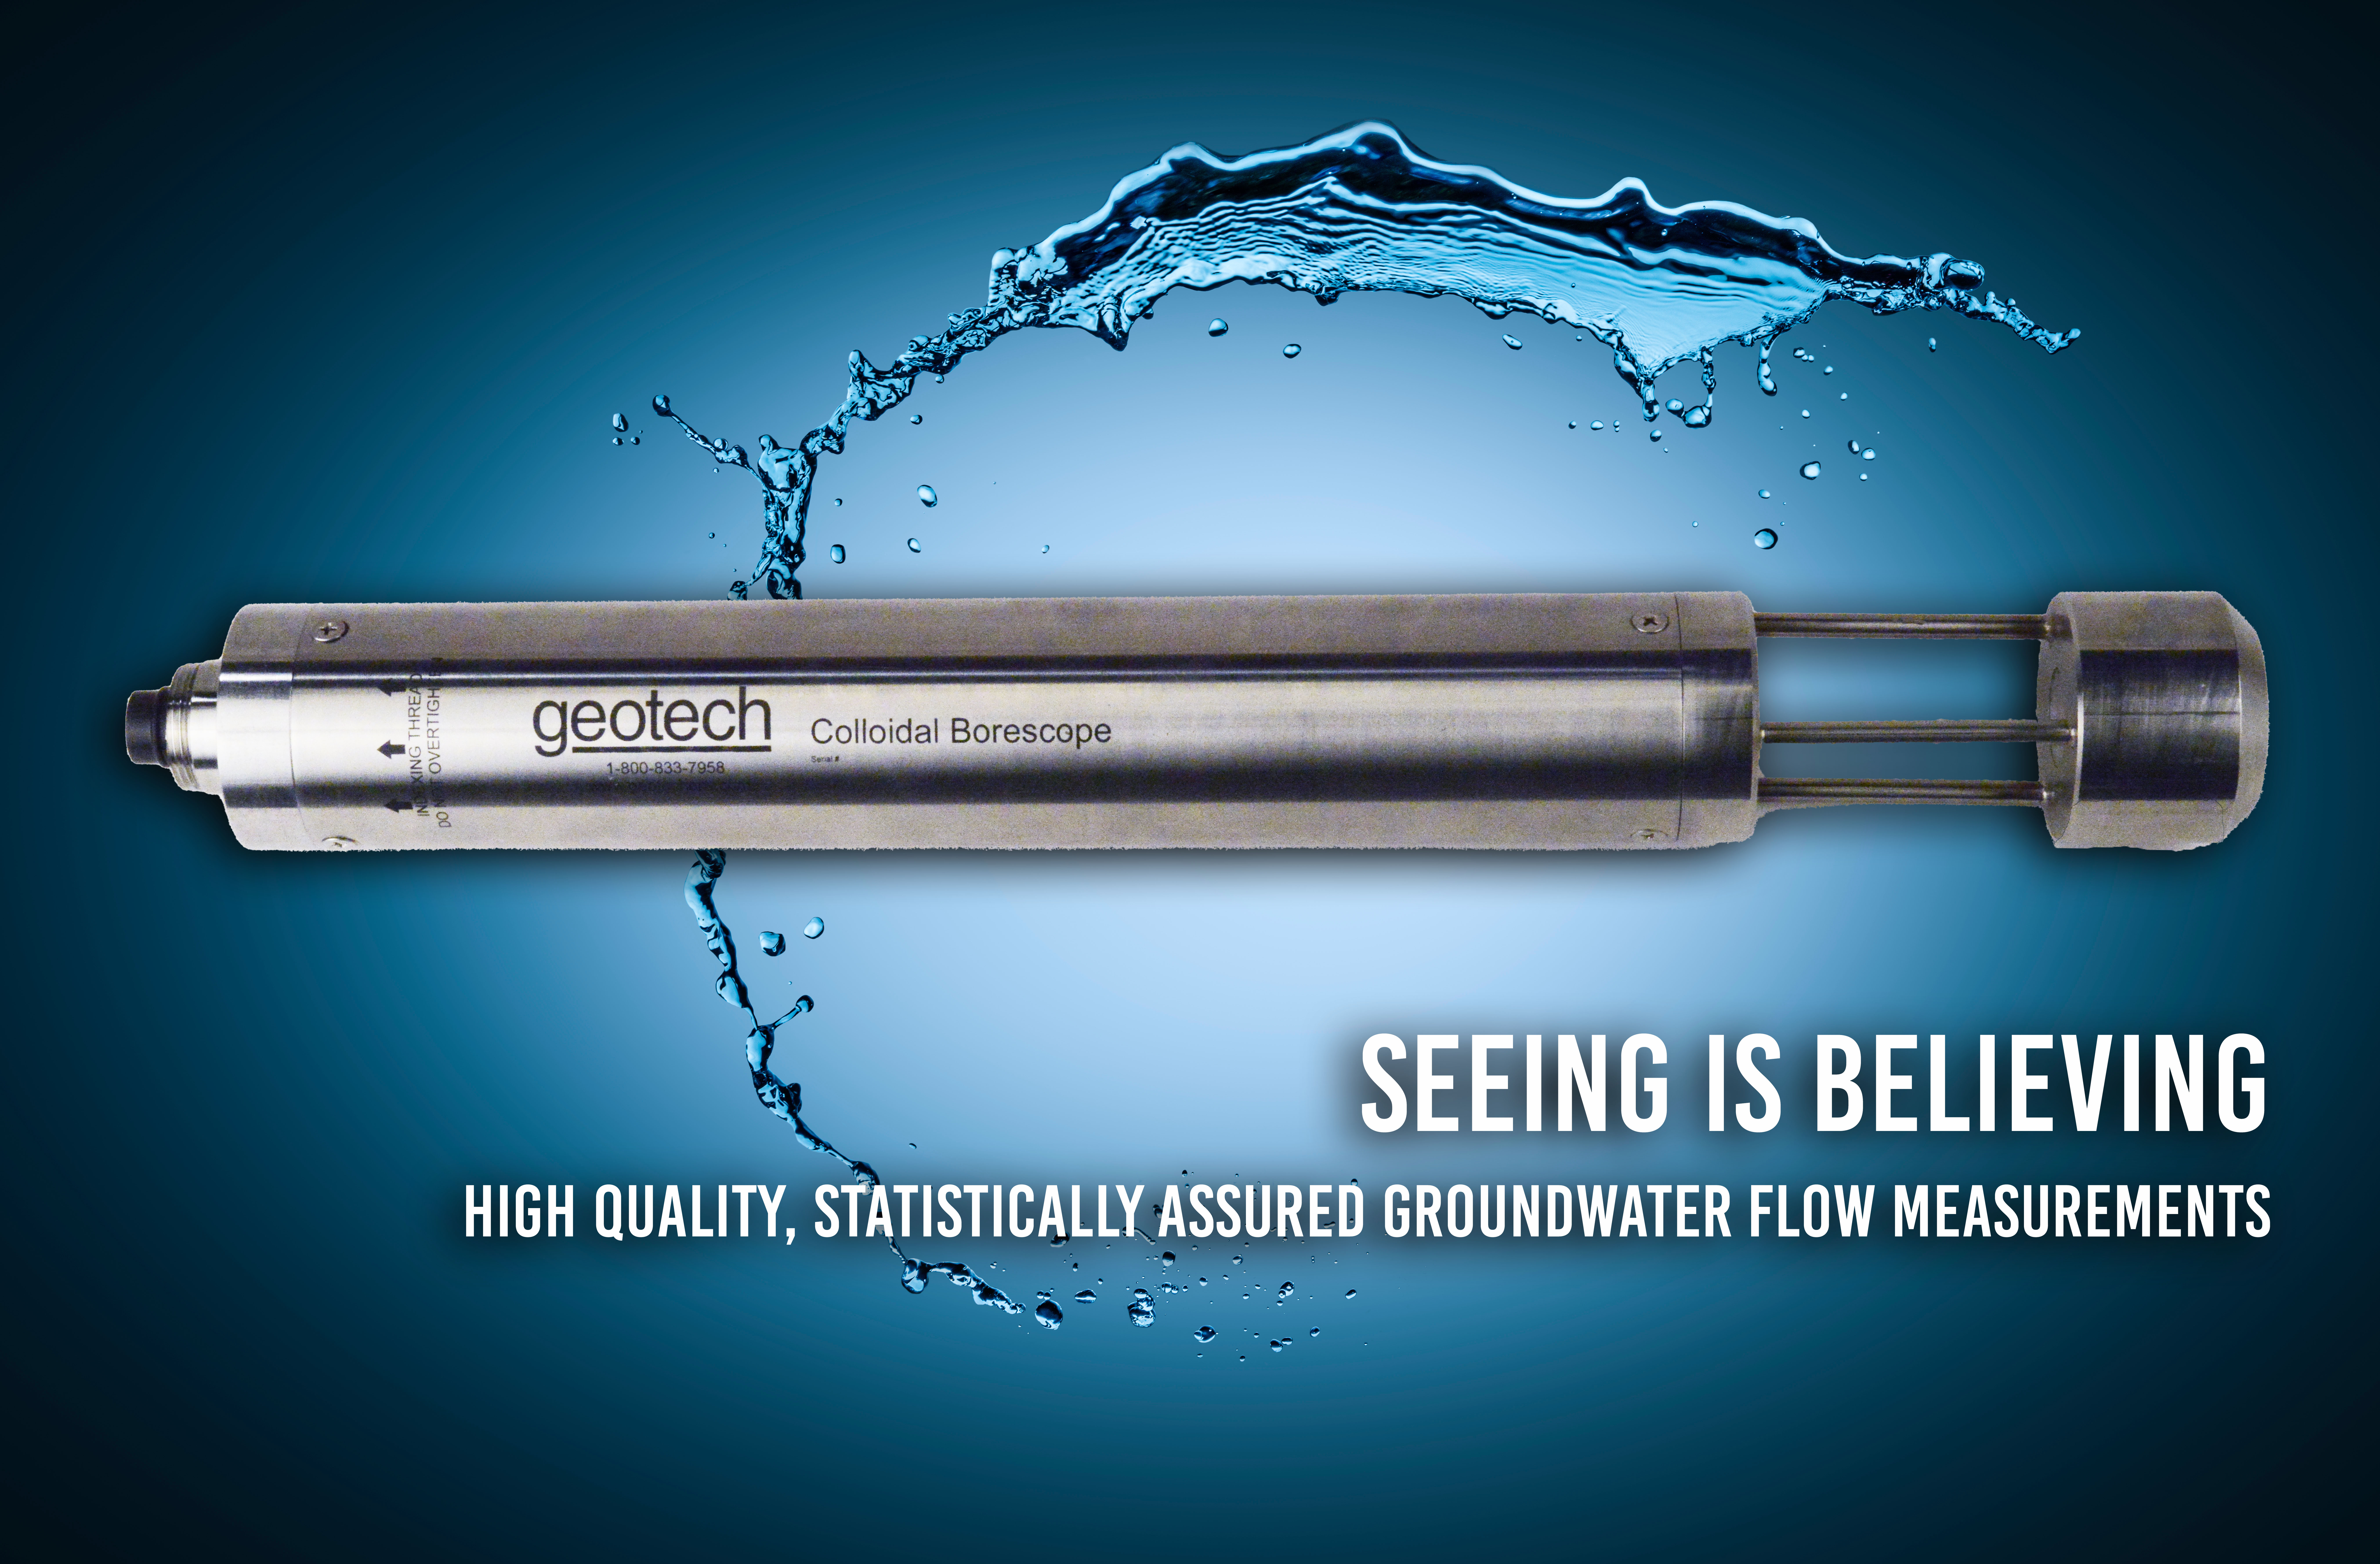 Geotech borescope, a long silver shaft that fits into wells, displayed with water backgrop